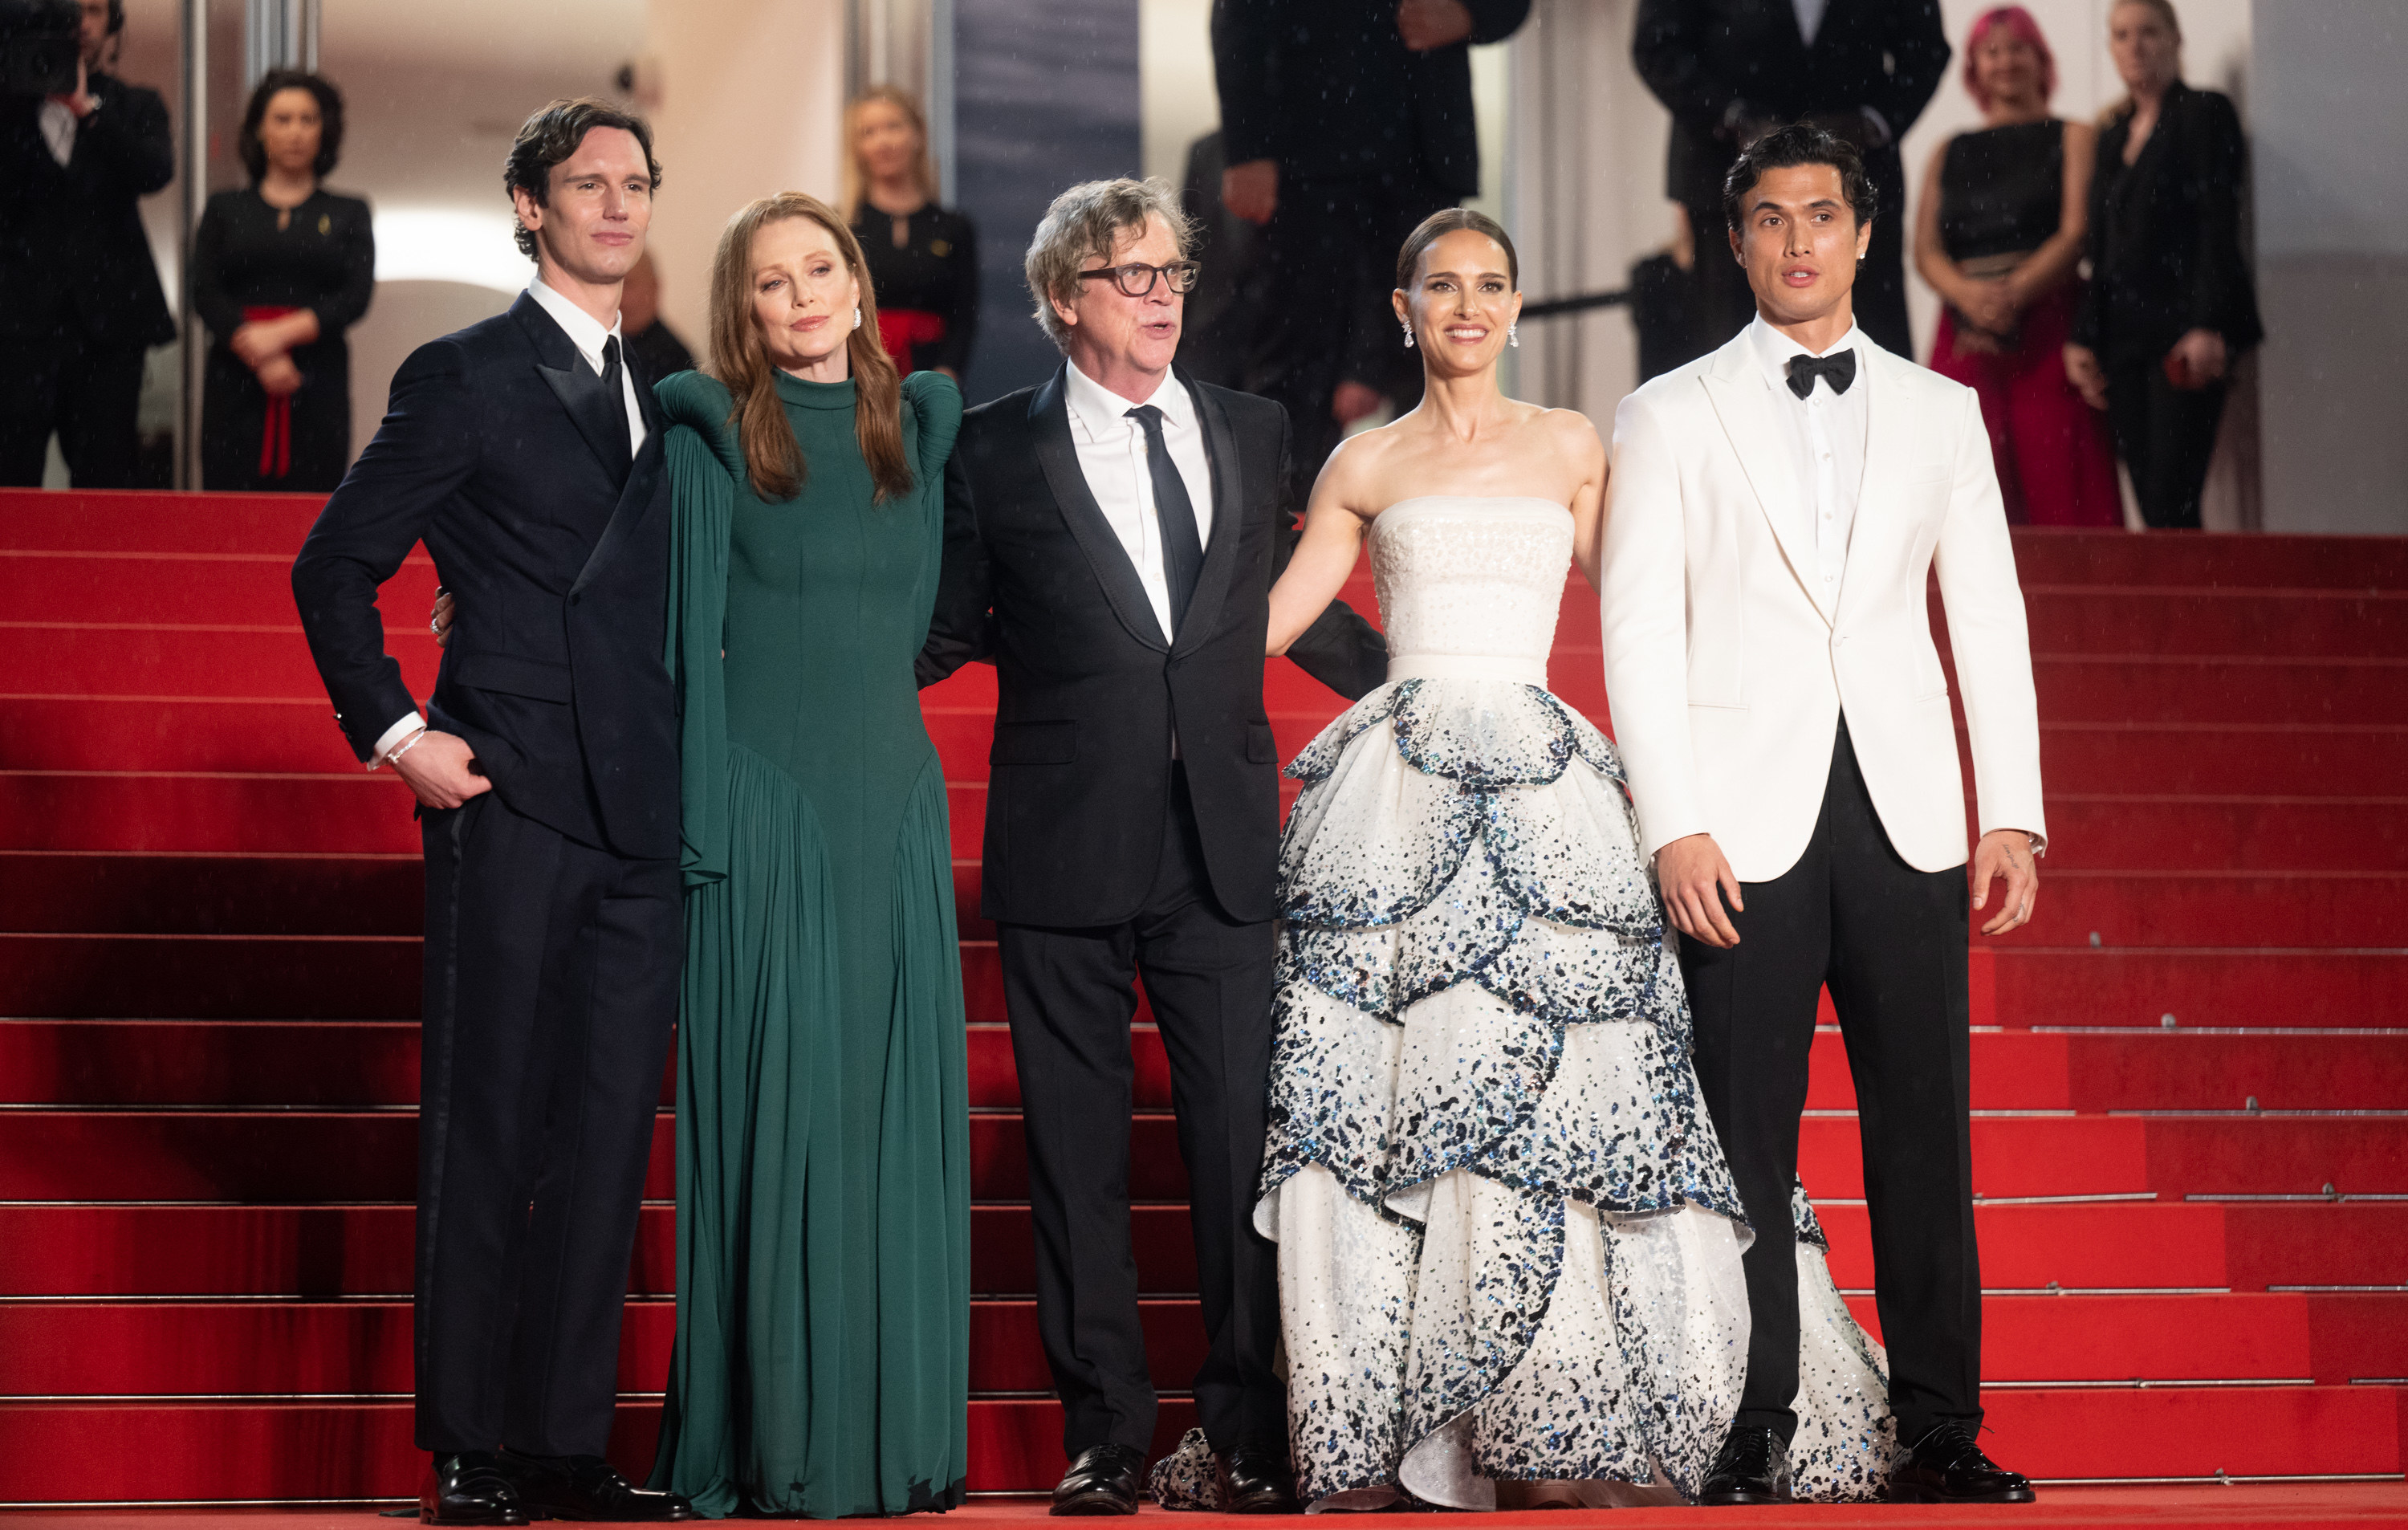 Cory Michael Smith, Julianne Moore, Todd Haynes, Natalie Portman, and Charles Melton pose together on the red carpet